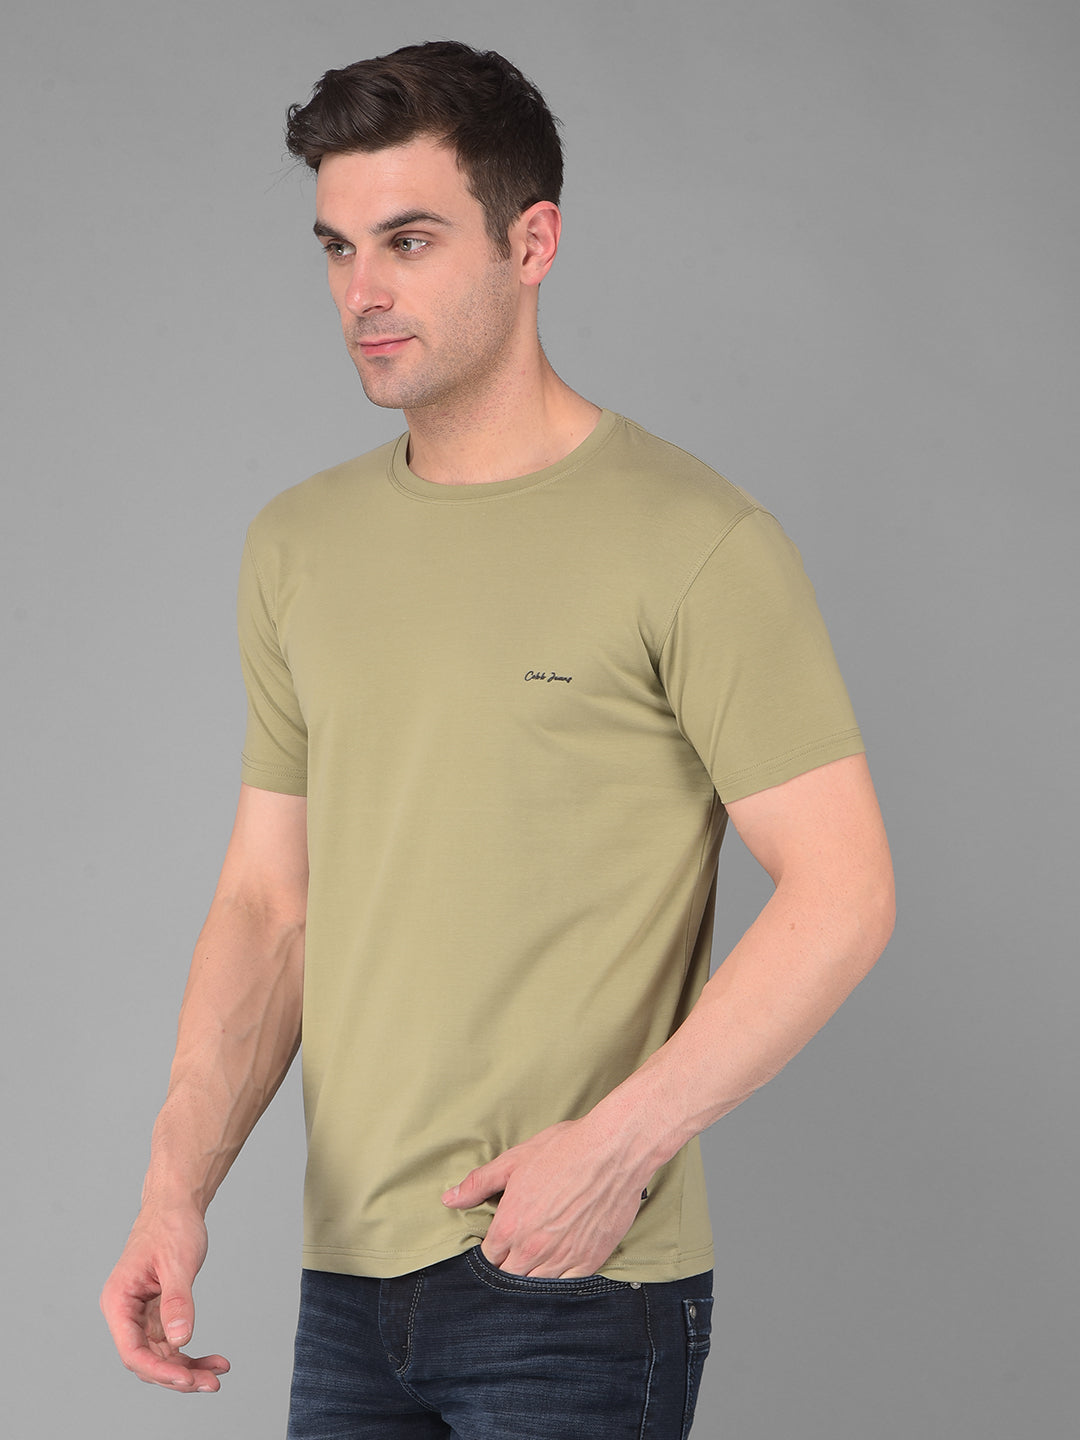 cobb solid olive green round neck t-shirt